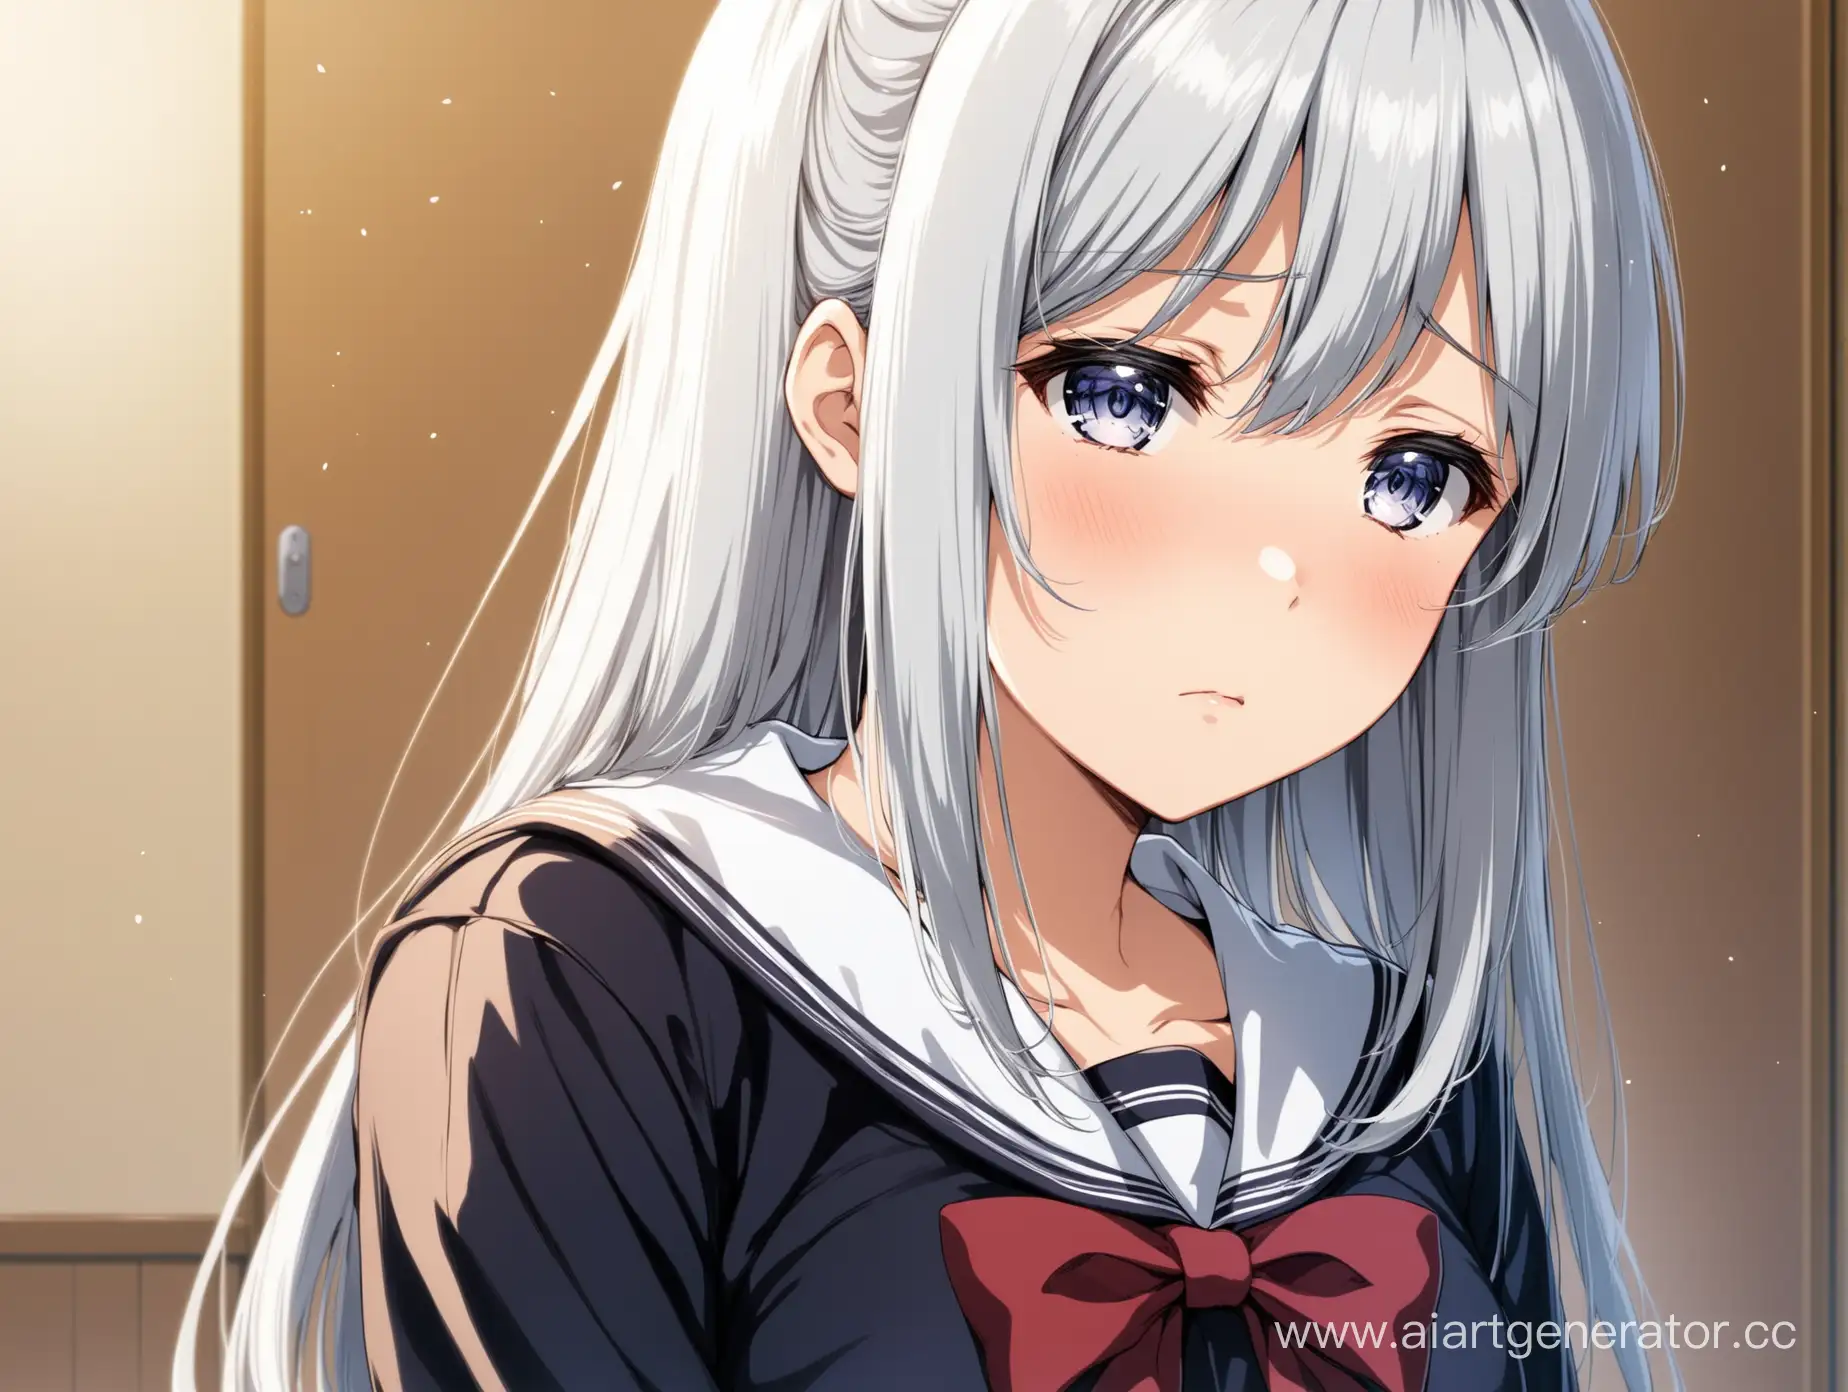 Melancholic-Anime-Schoolgirl-with-Silver-Hair-and-Mediumsized-Breasts